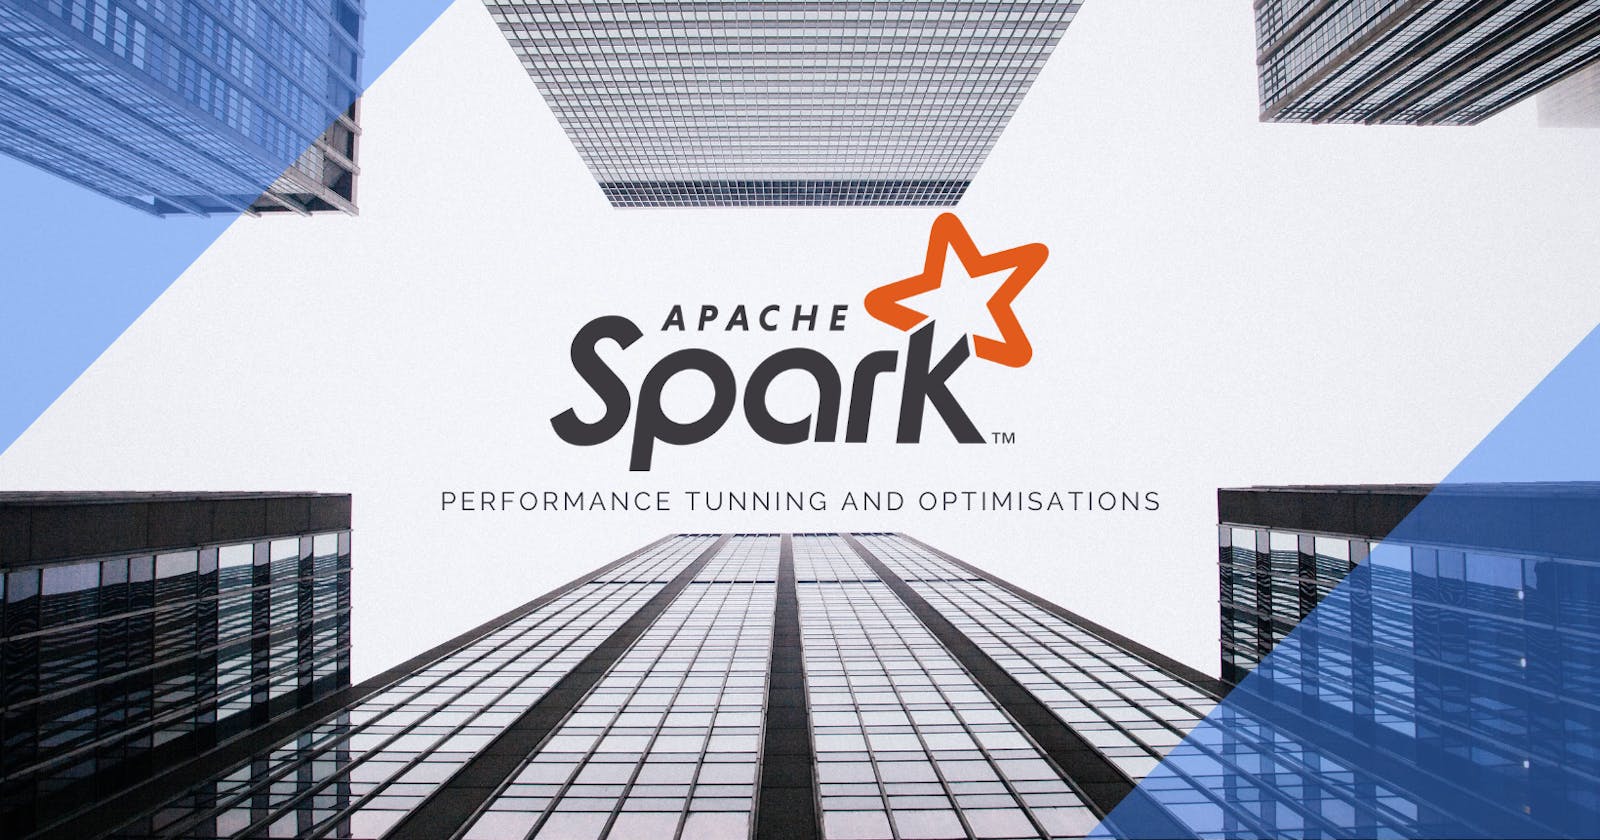 Apache Spark Performance Tuning - Other Optimisations